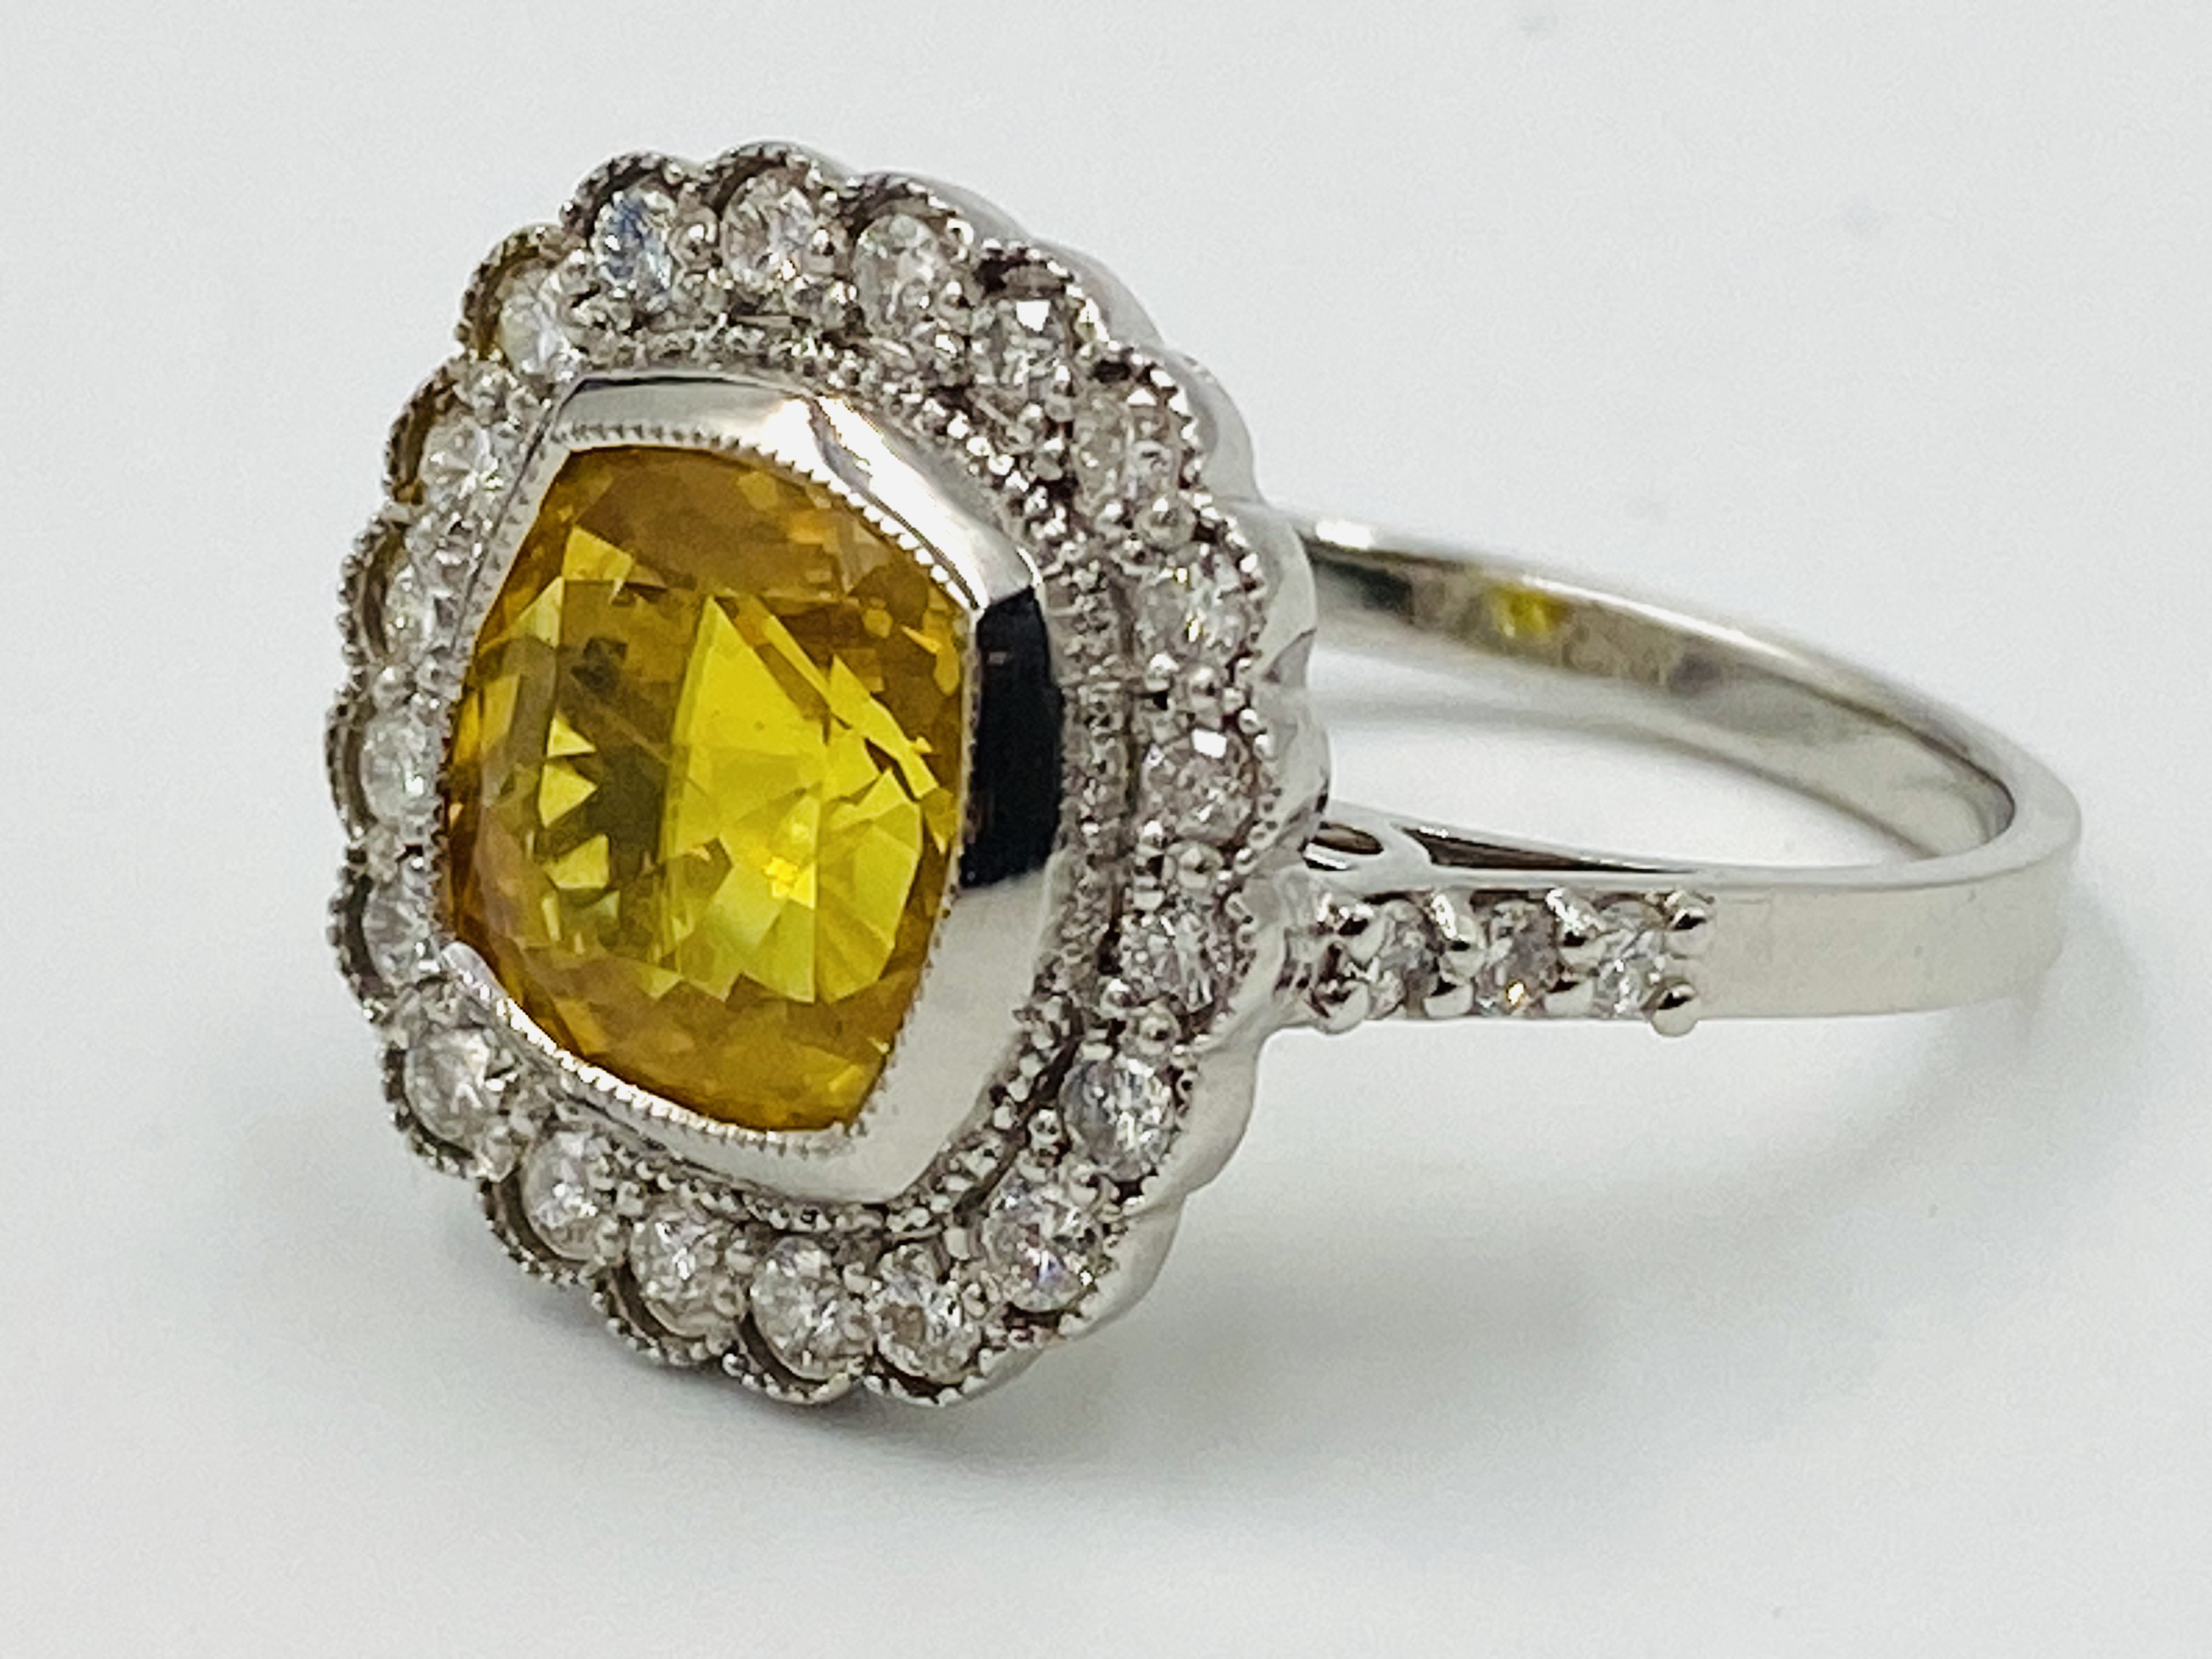 18ct white gold, yellow sapphire and diamond ring - Image 2 of 4